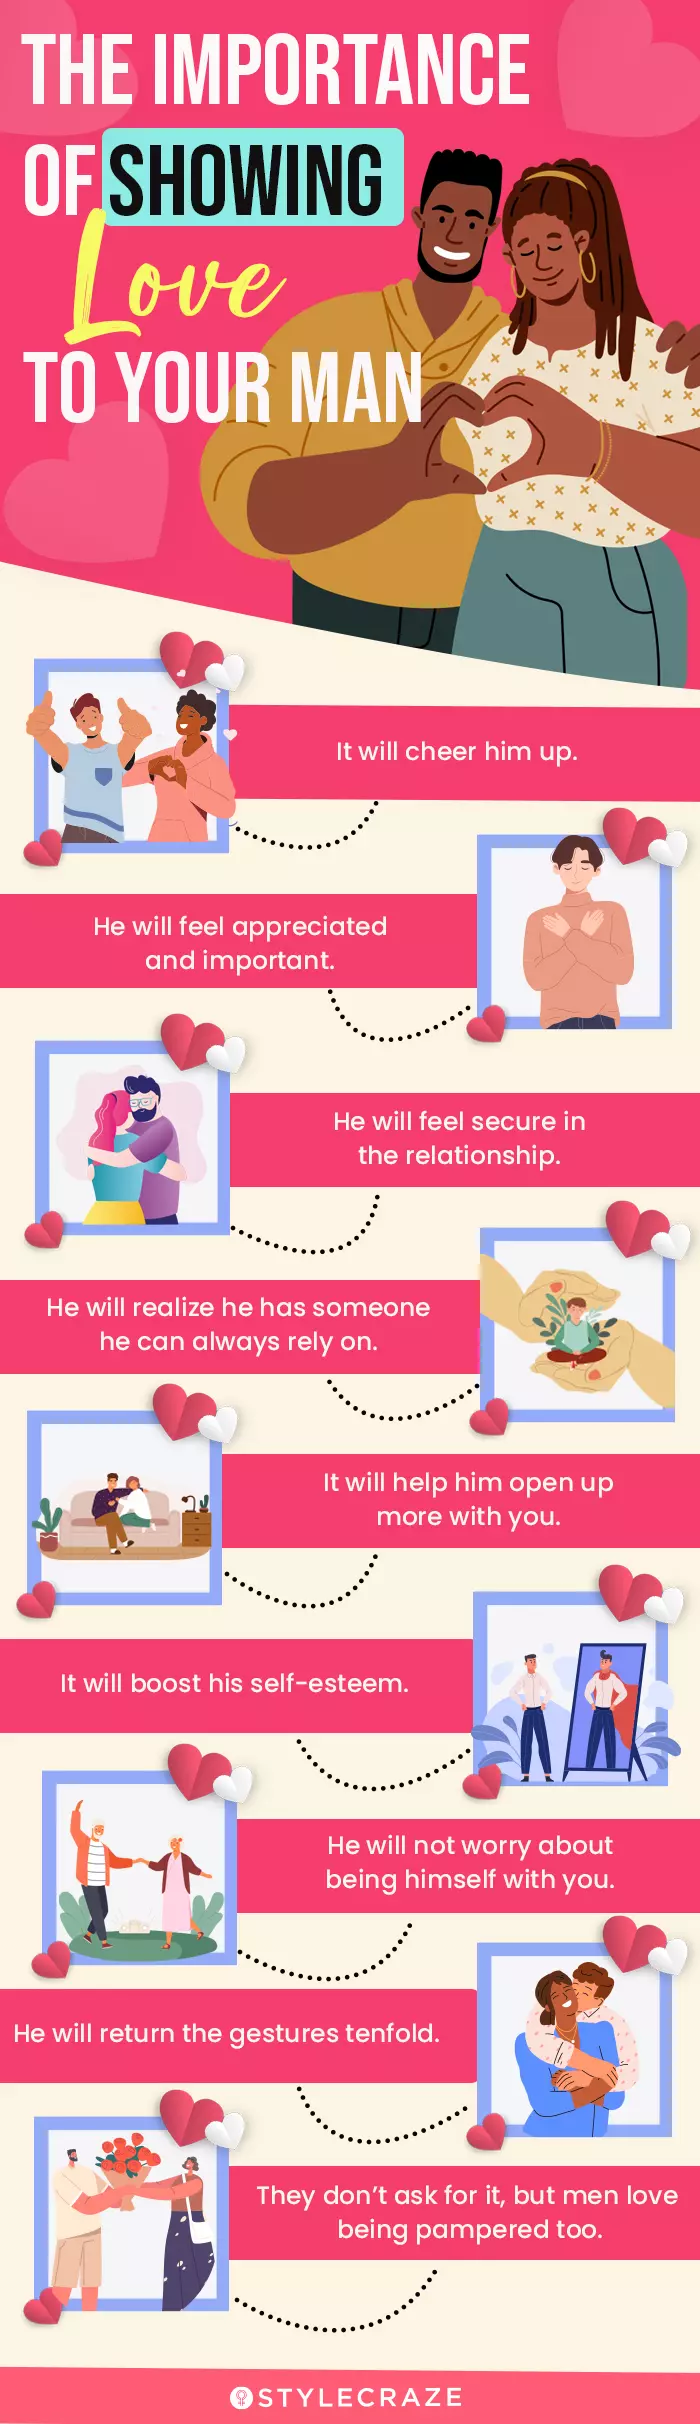 the importance of showing love to your man (infographic)